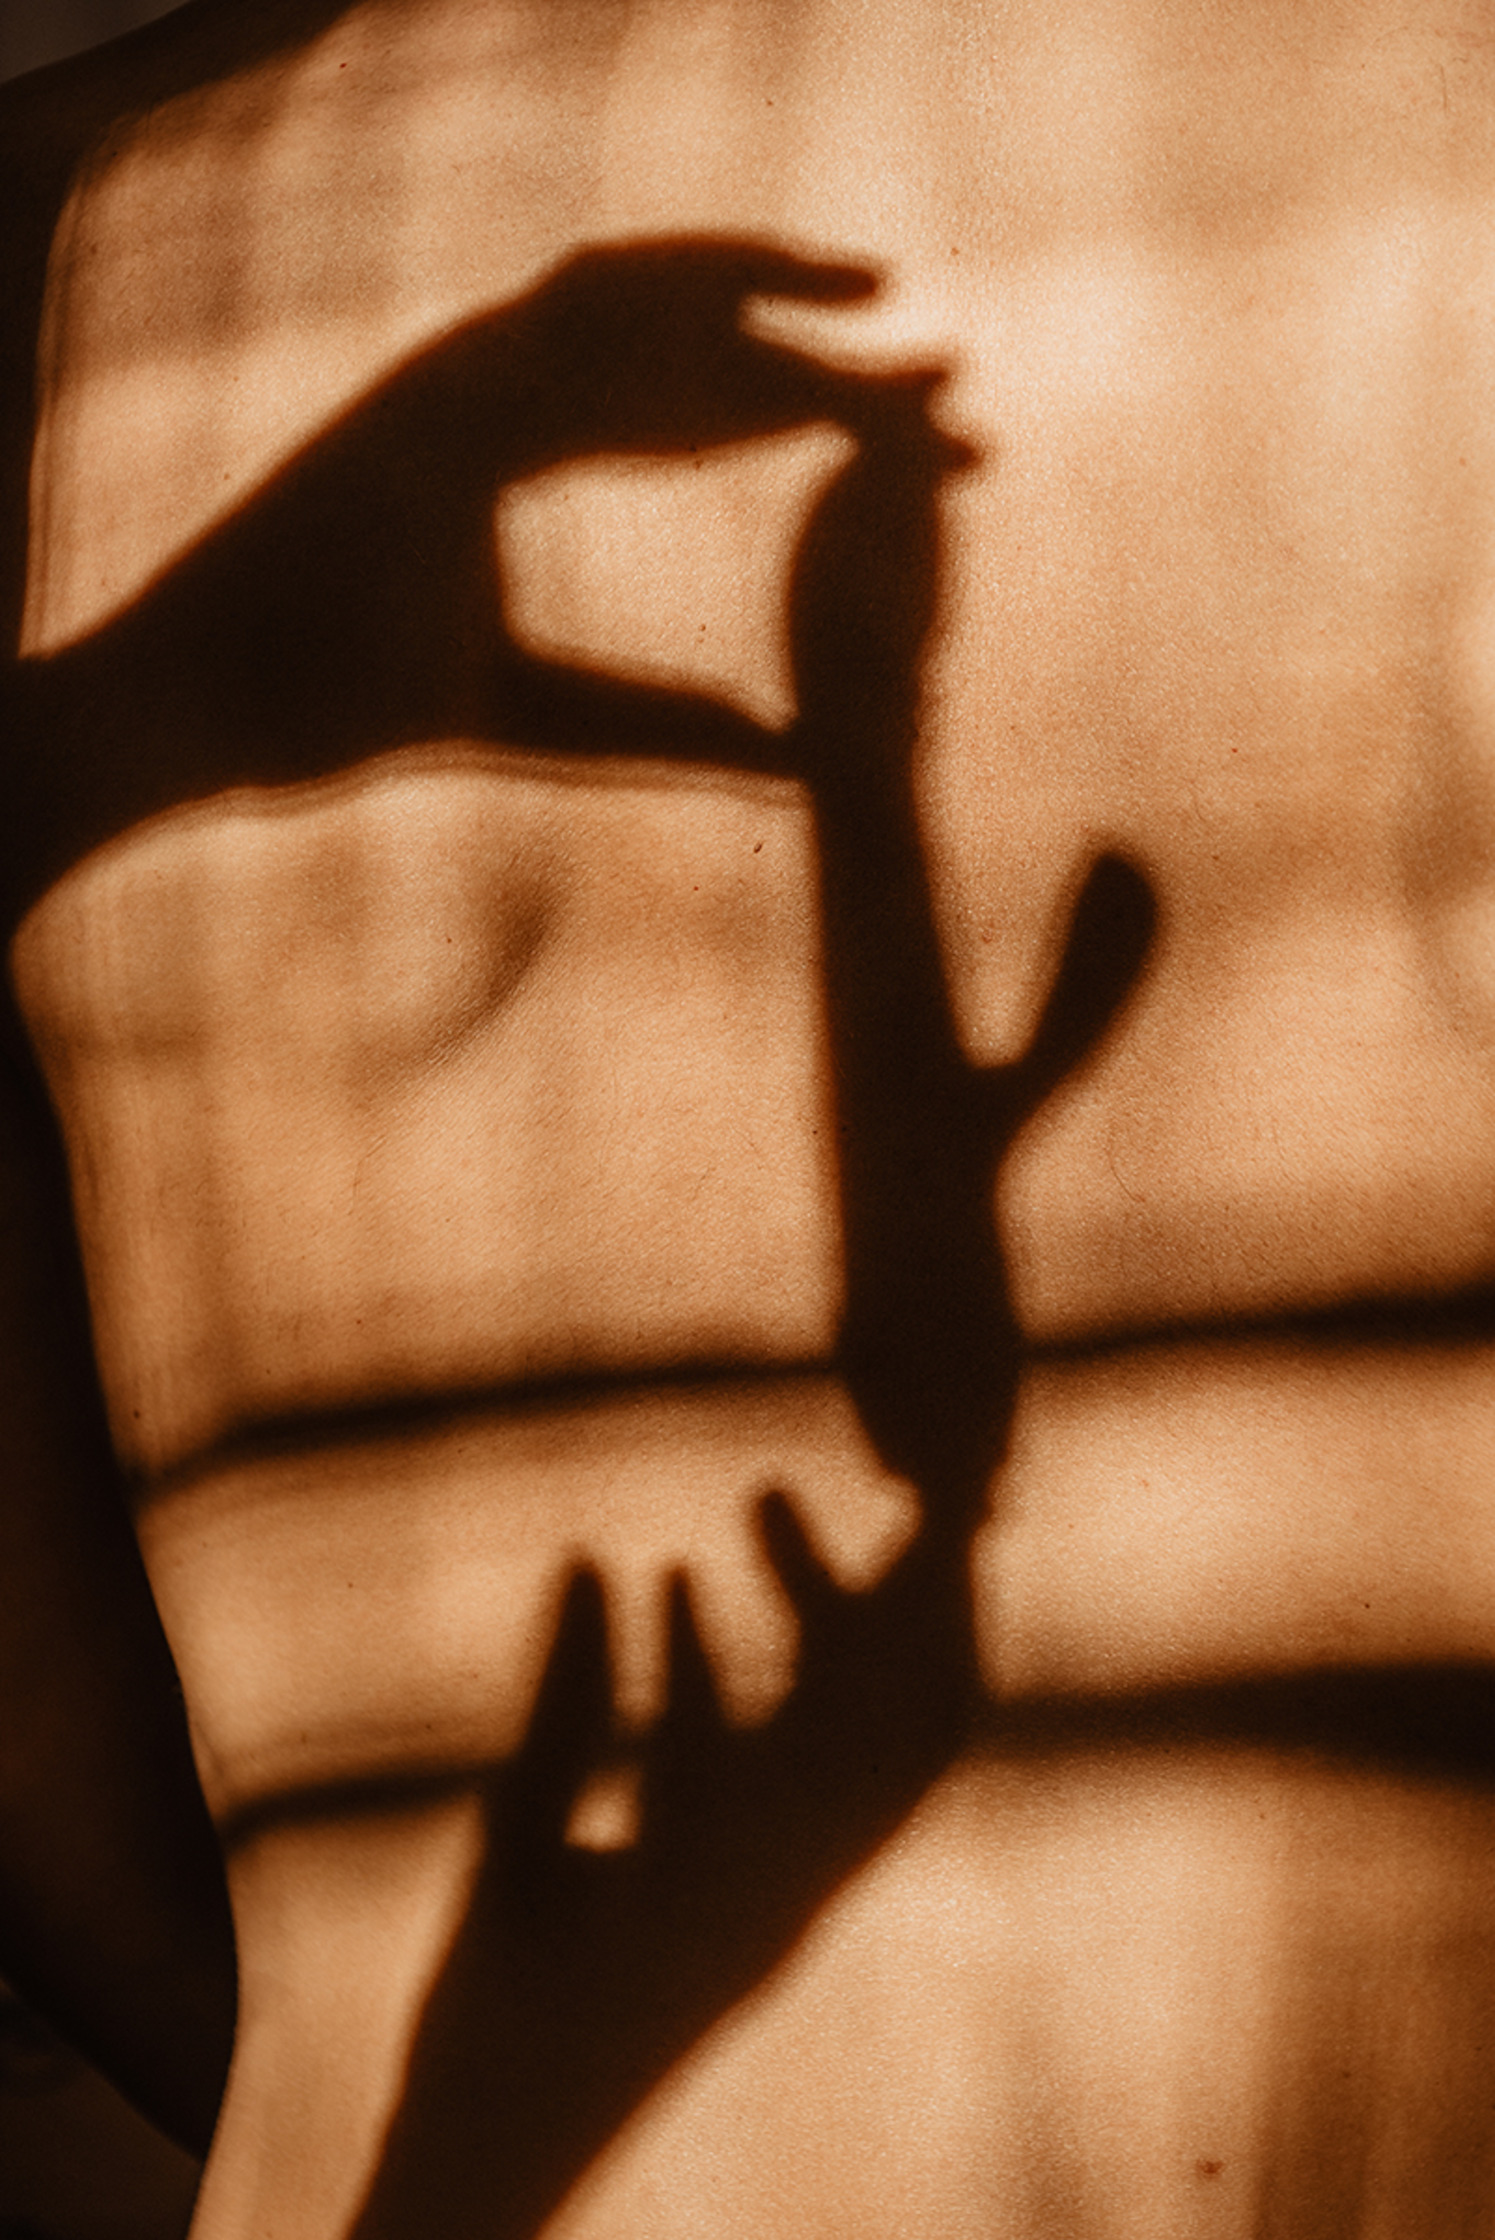 a shadow of a person holding a amorelie vibrator